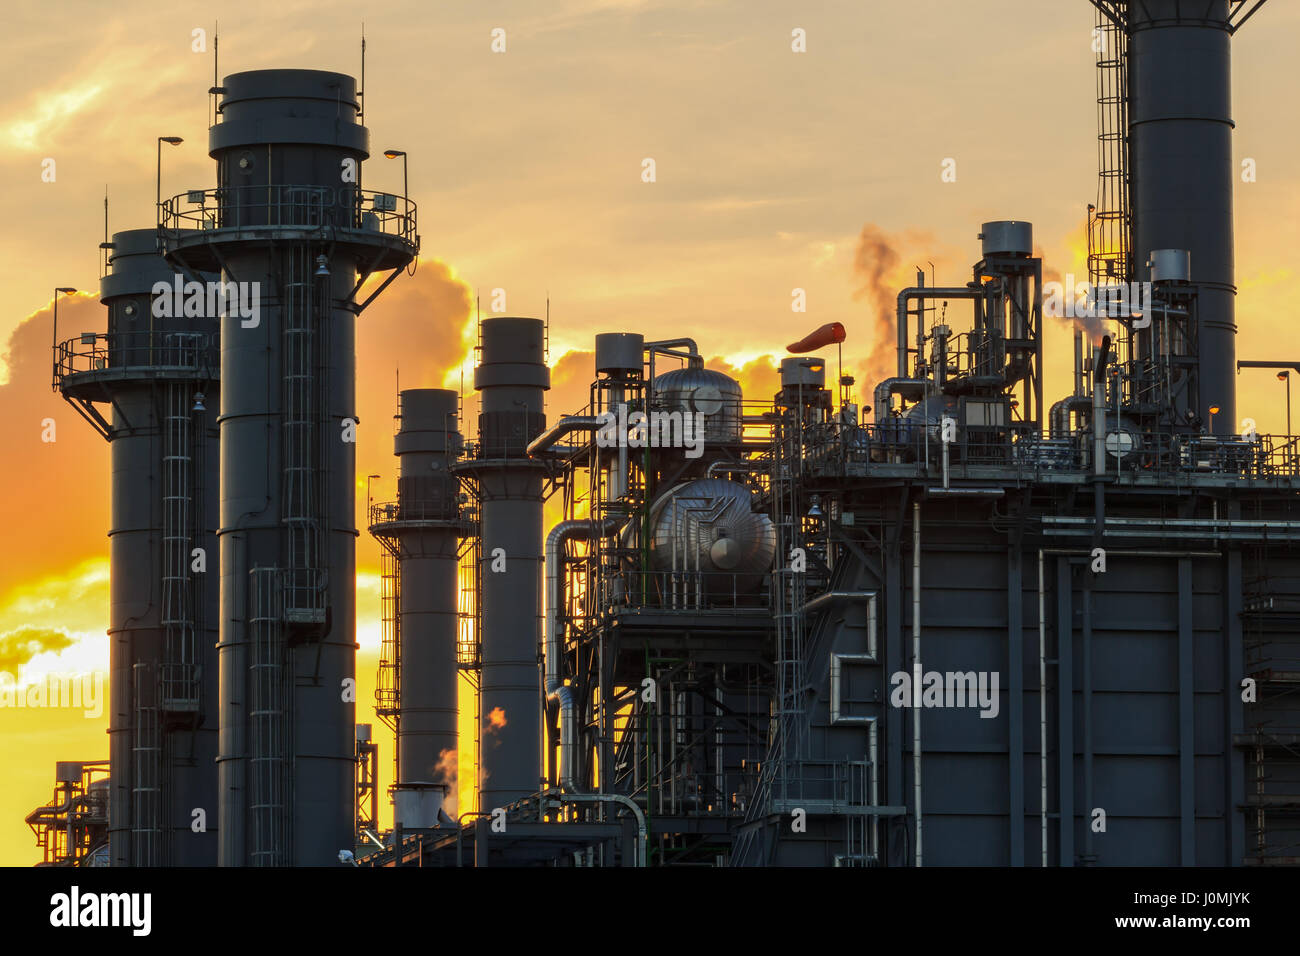 Natural Gas Combined Cycle Power Plant Stock Photo